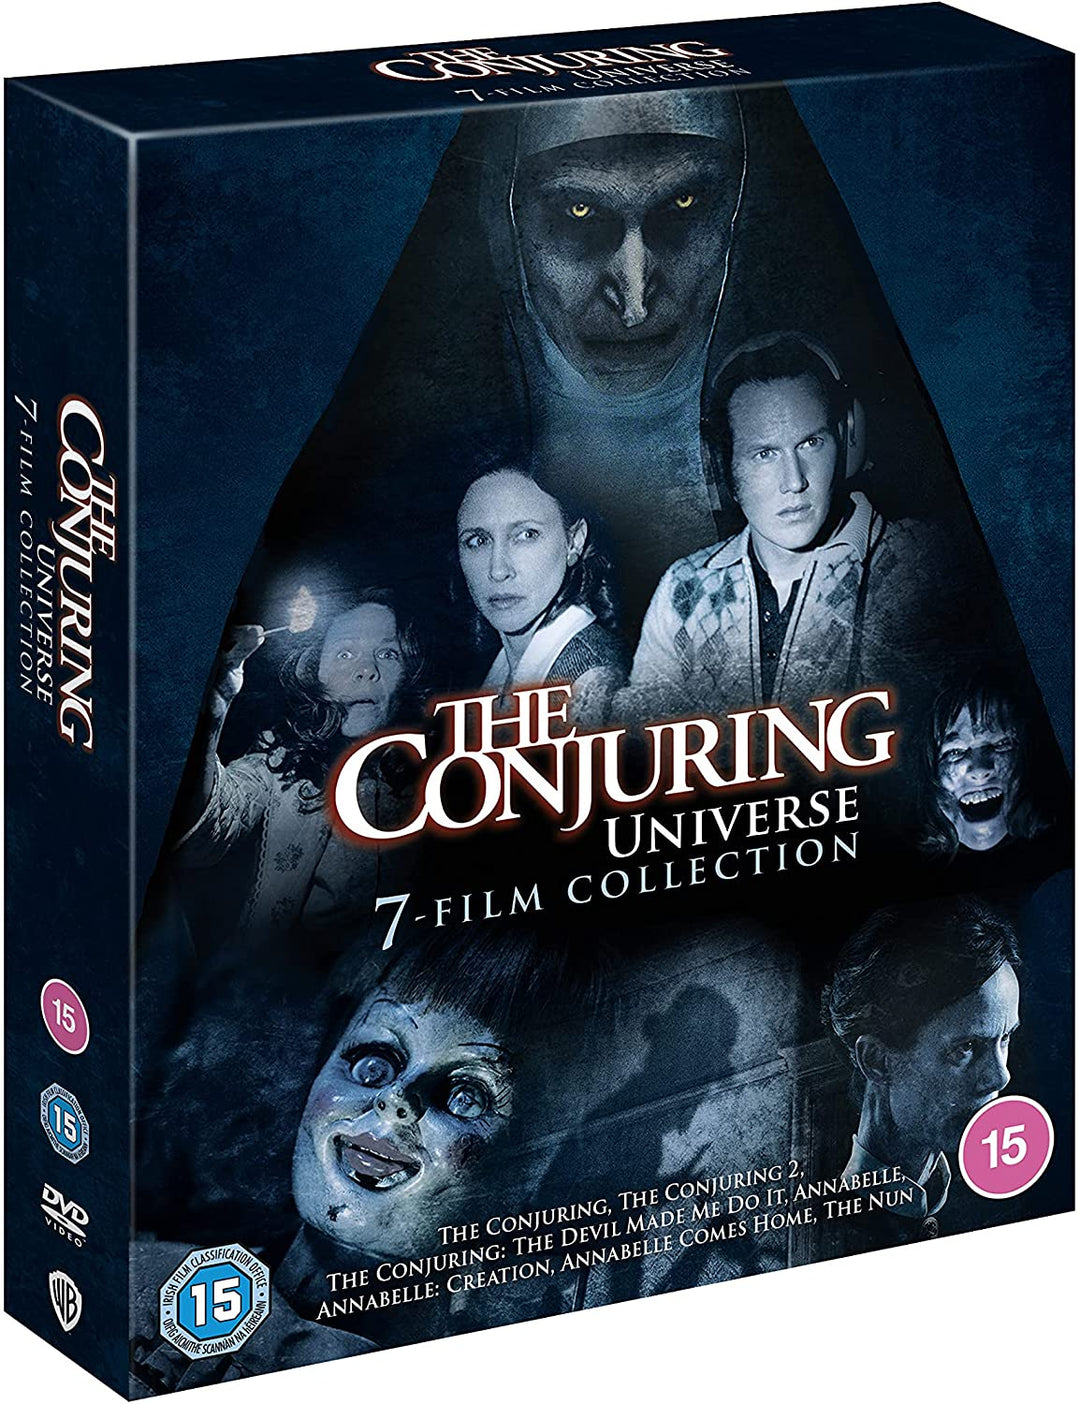 The Conjuring 7-Film Collection [2021] - Horror/Thriller [DVD]